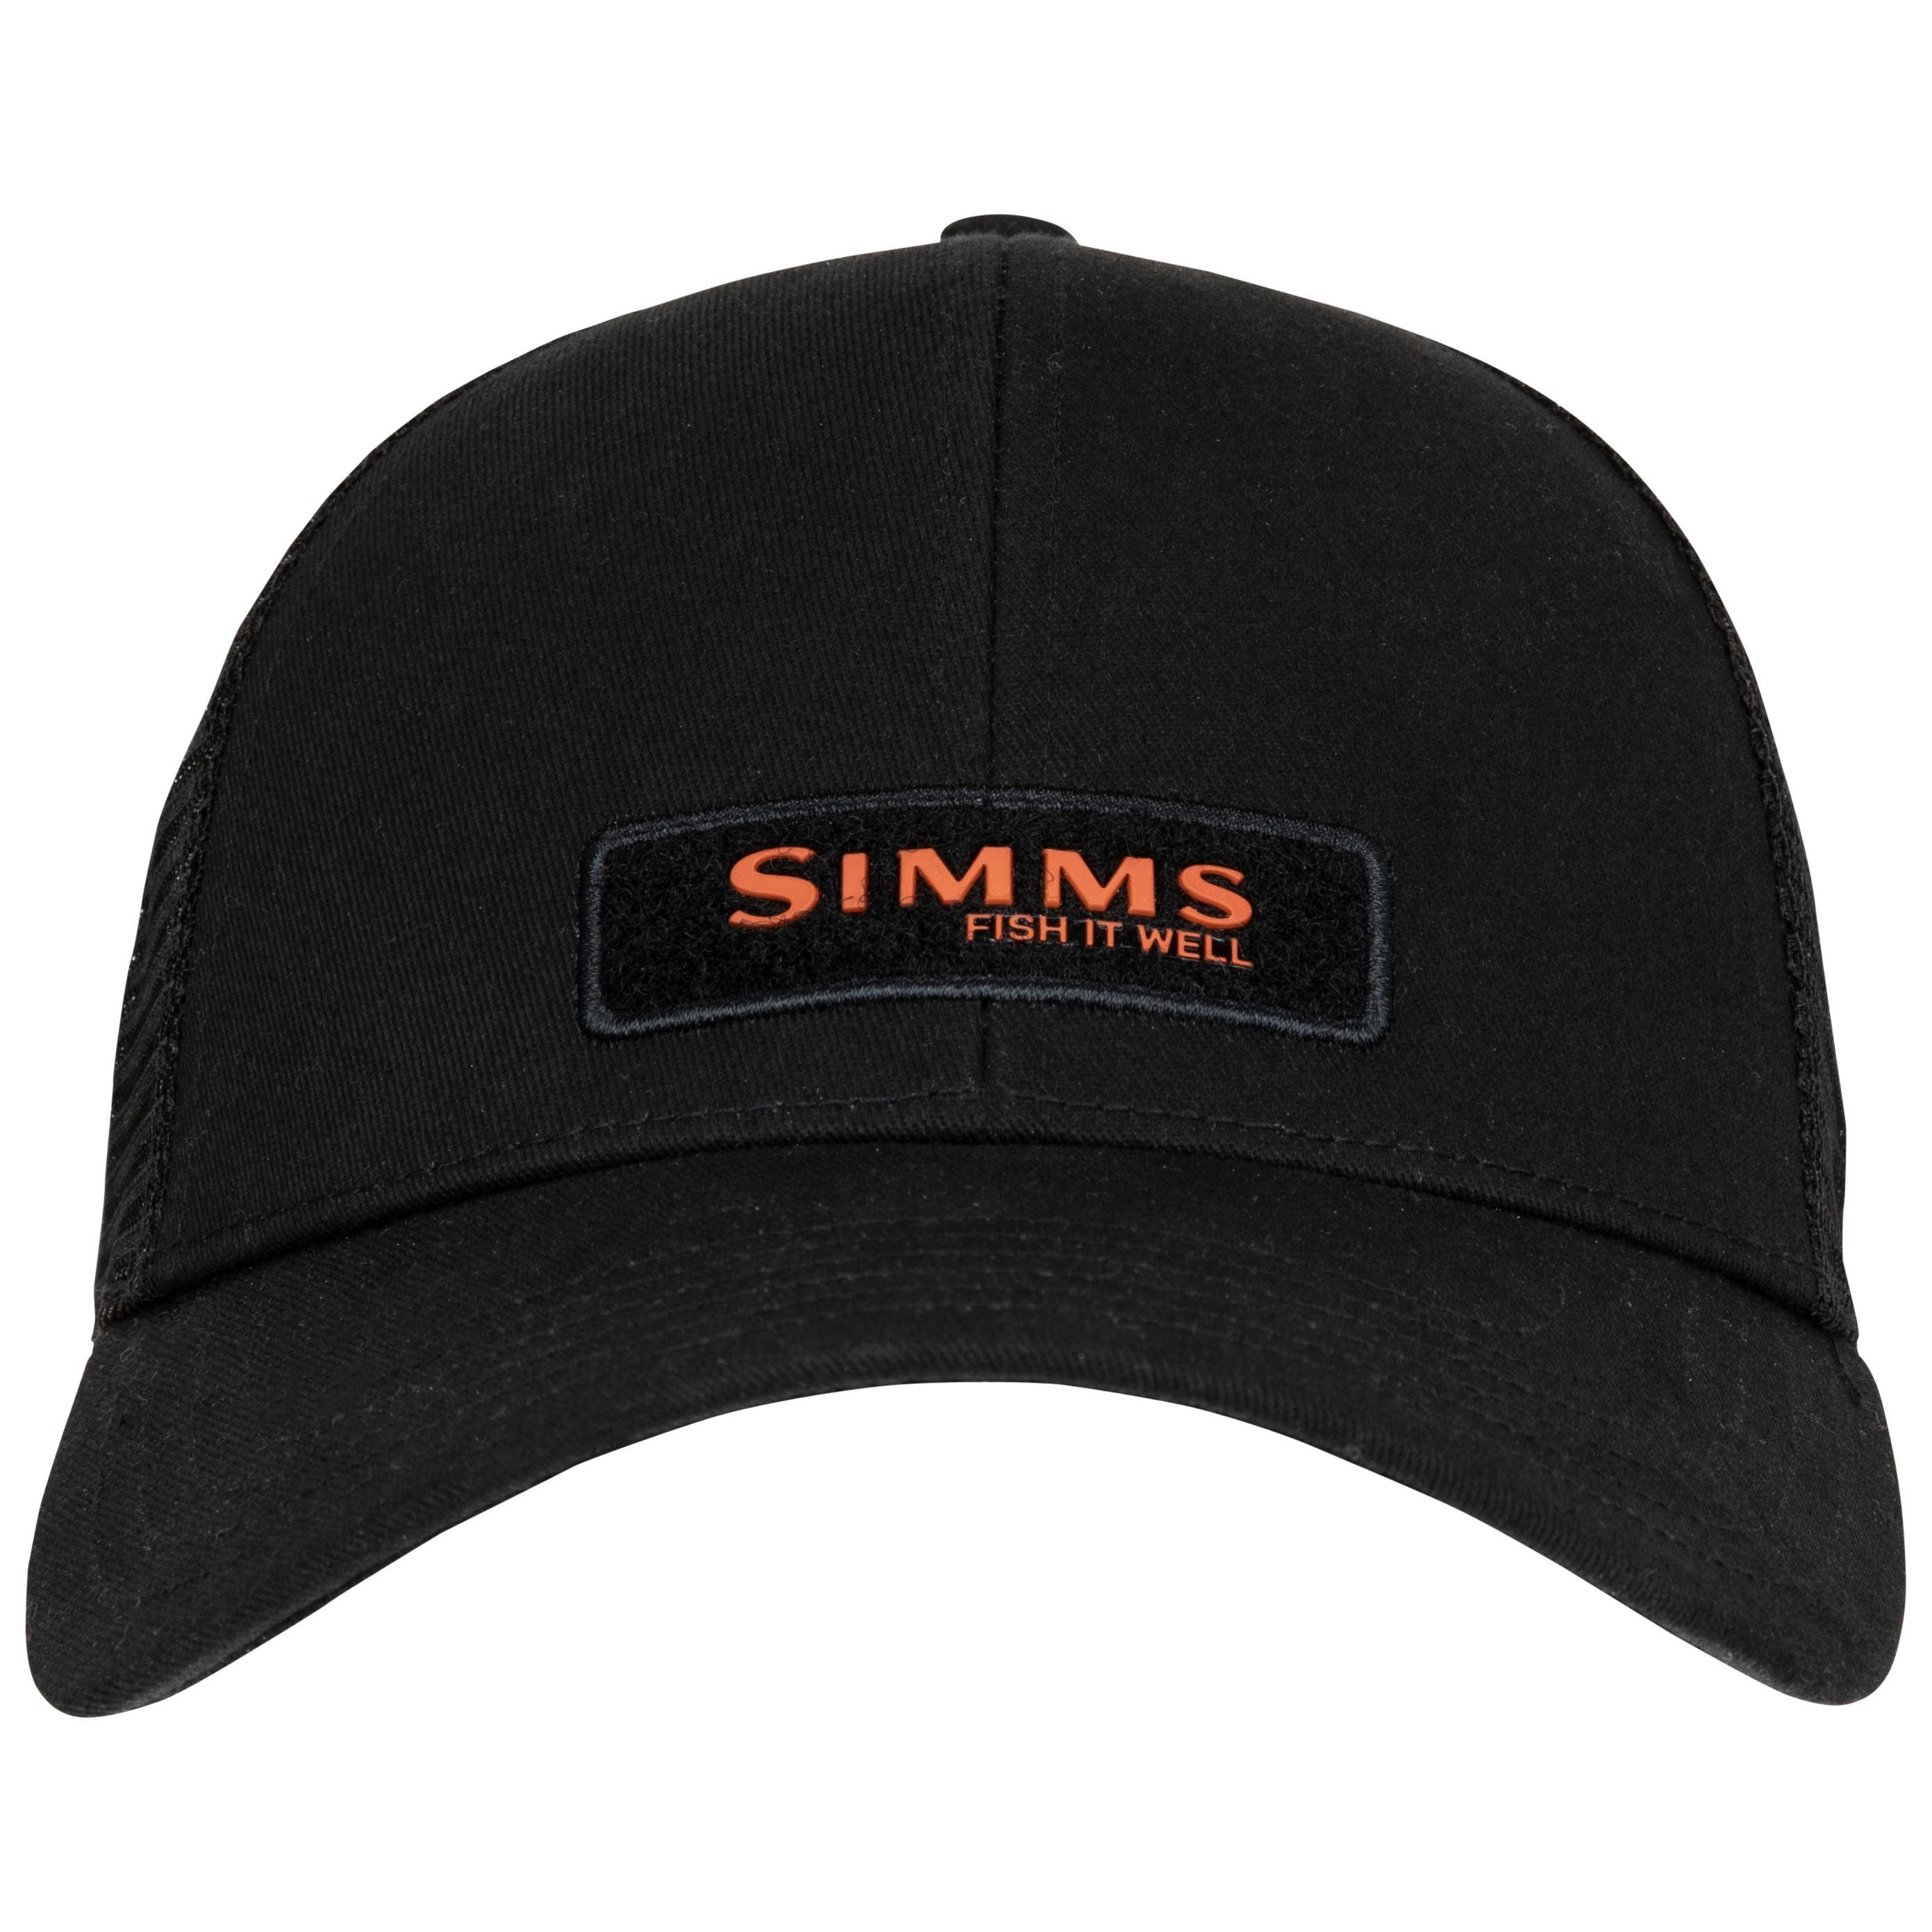 Simms Small Fit Fish It Well Forever Trucker Black Image 02